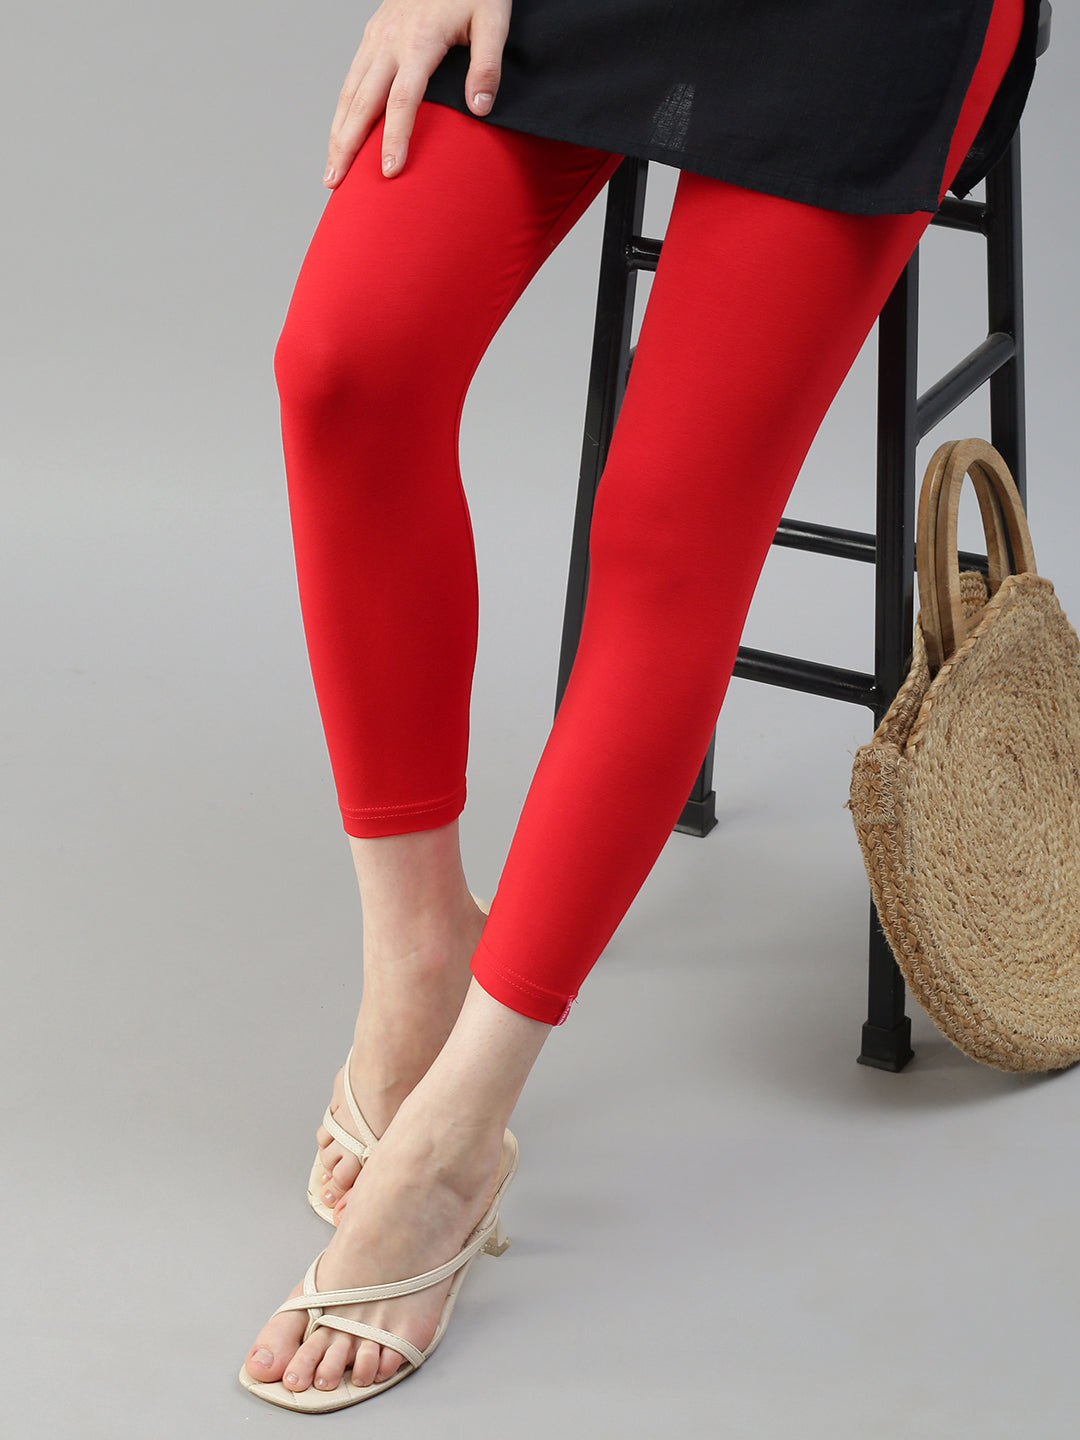 Prisma Shimmer Leggings in Peach for a Chic Look